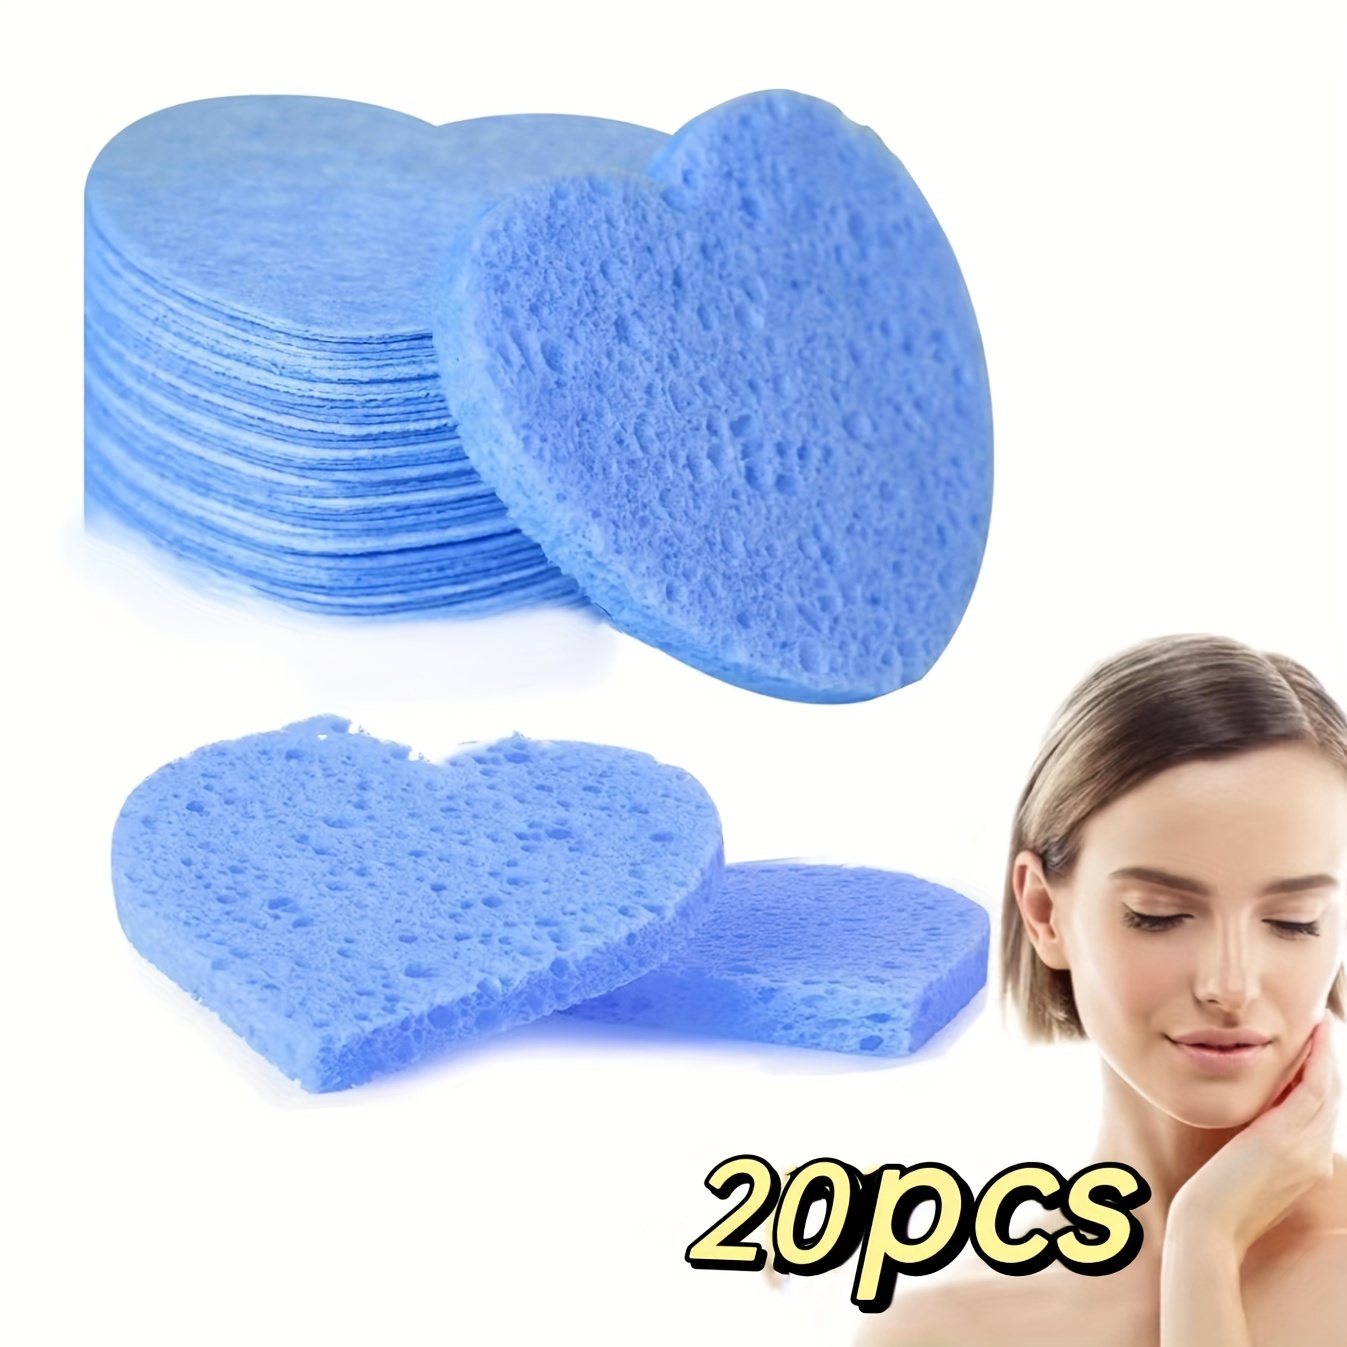 10/20/30 Count Compressed Facial Sponges Heart Shape Round Shape Face  Sponges For Cleansing Natural Facial Cleansing Sponges Pads Exfoliating  Sponges